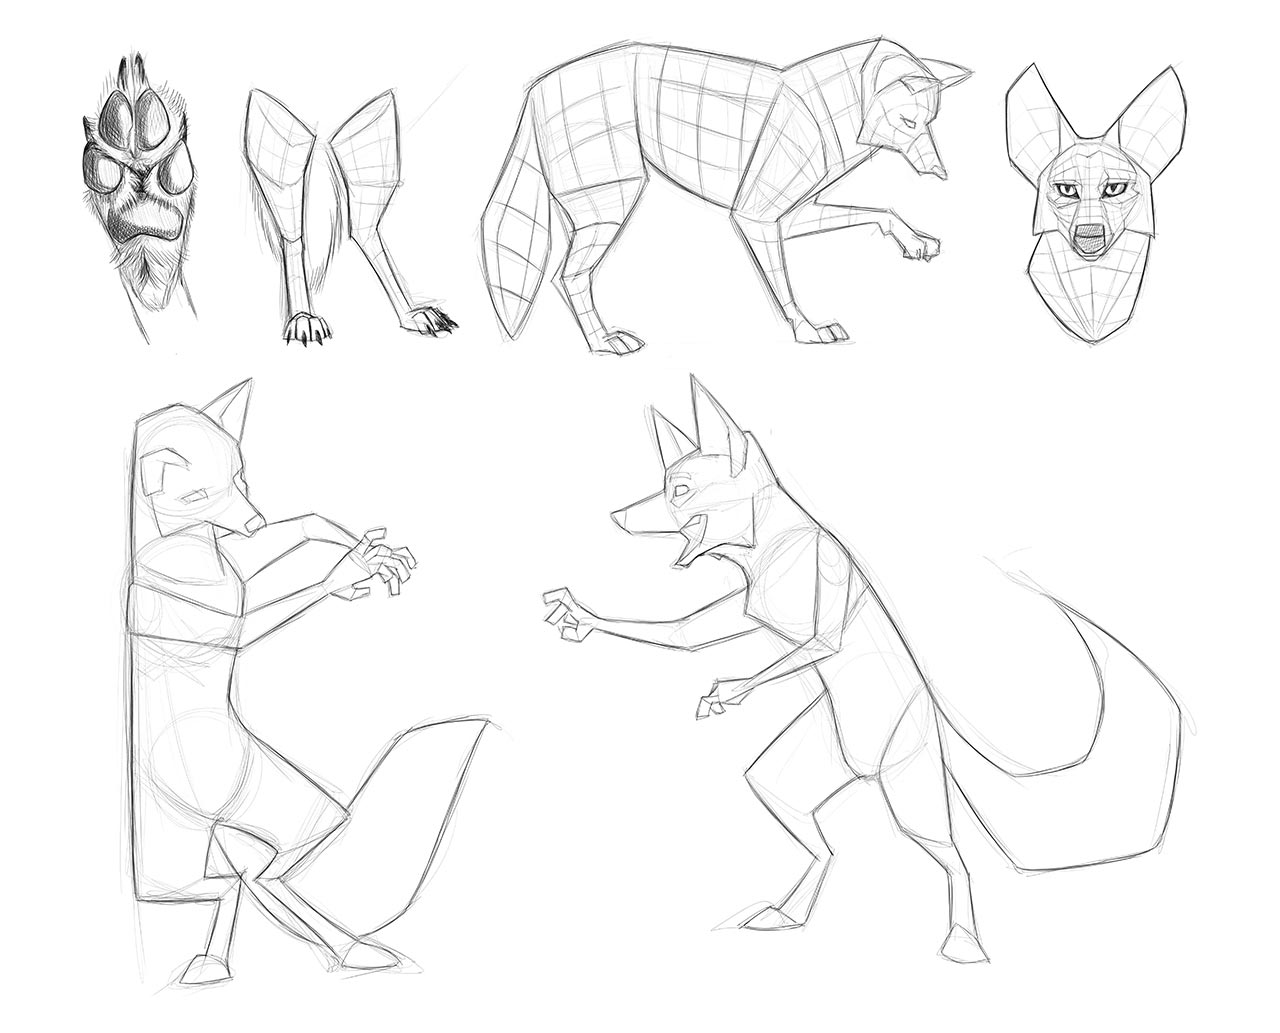 Coyote drawing reference